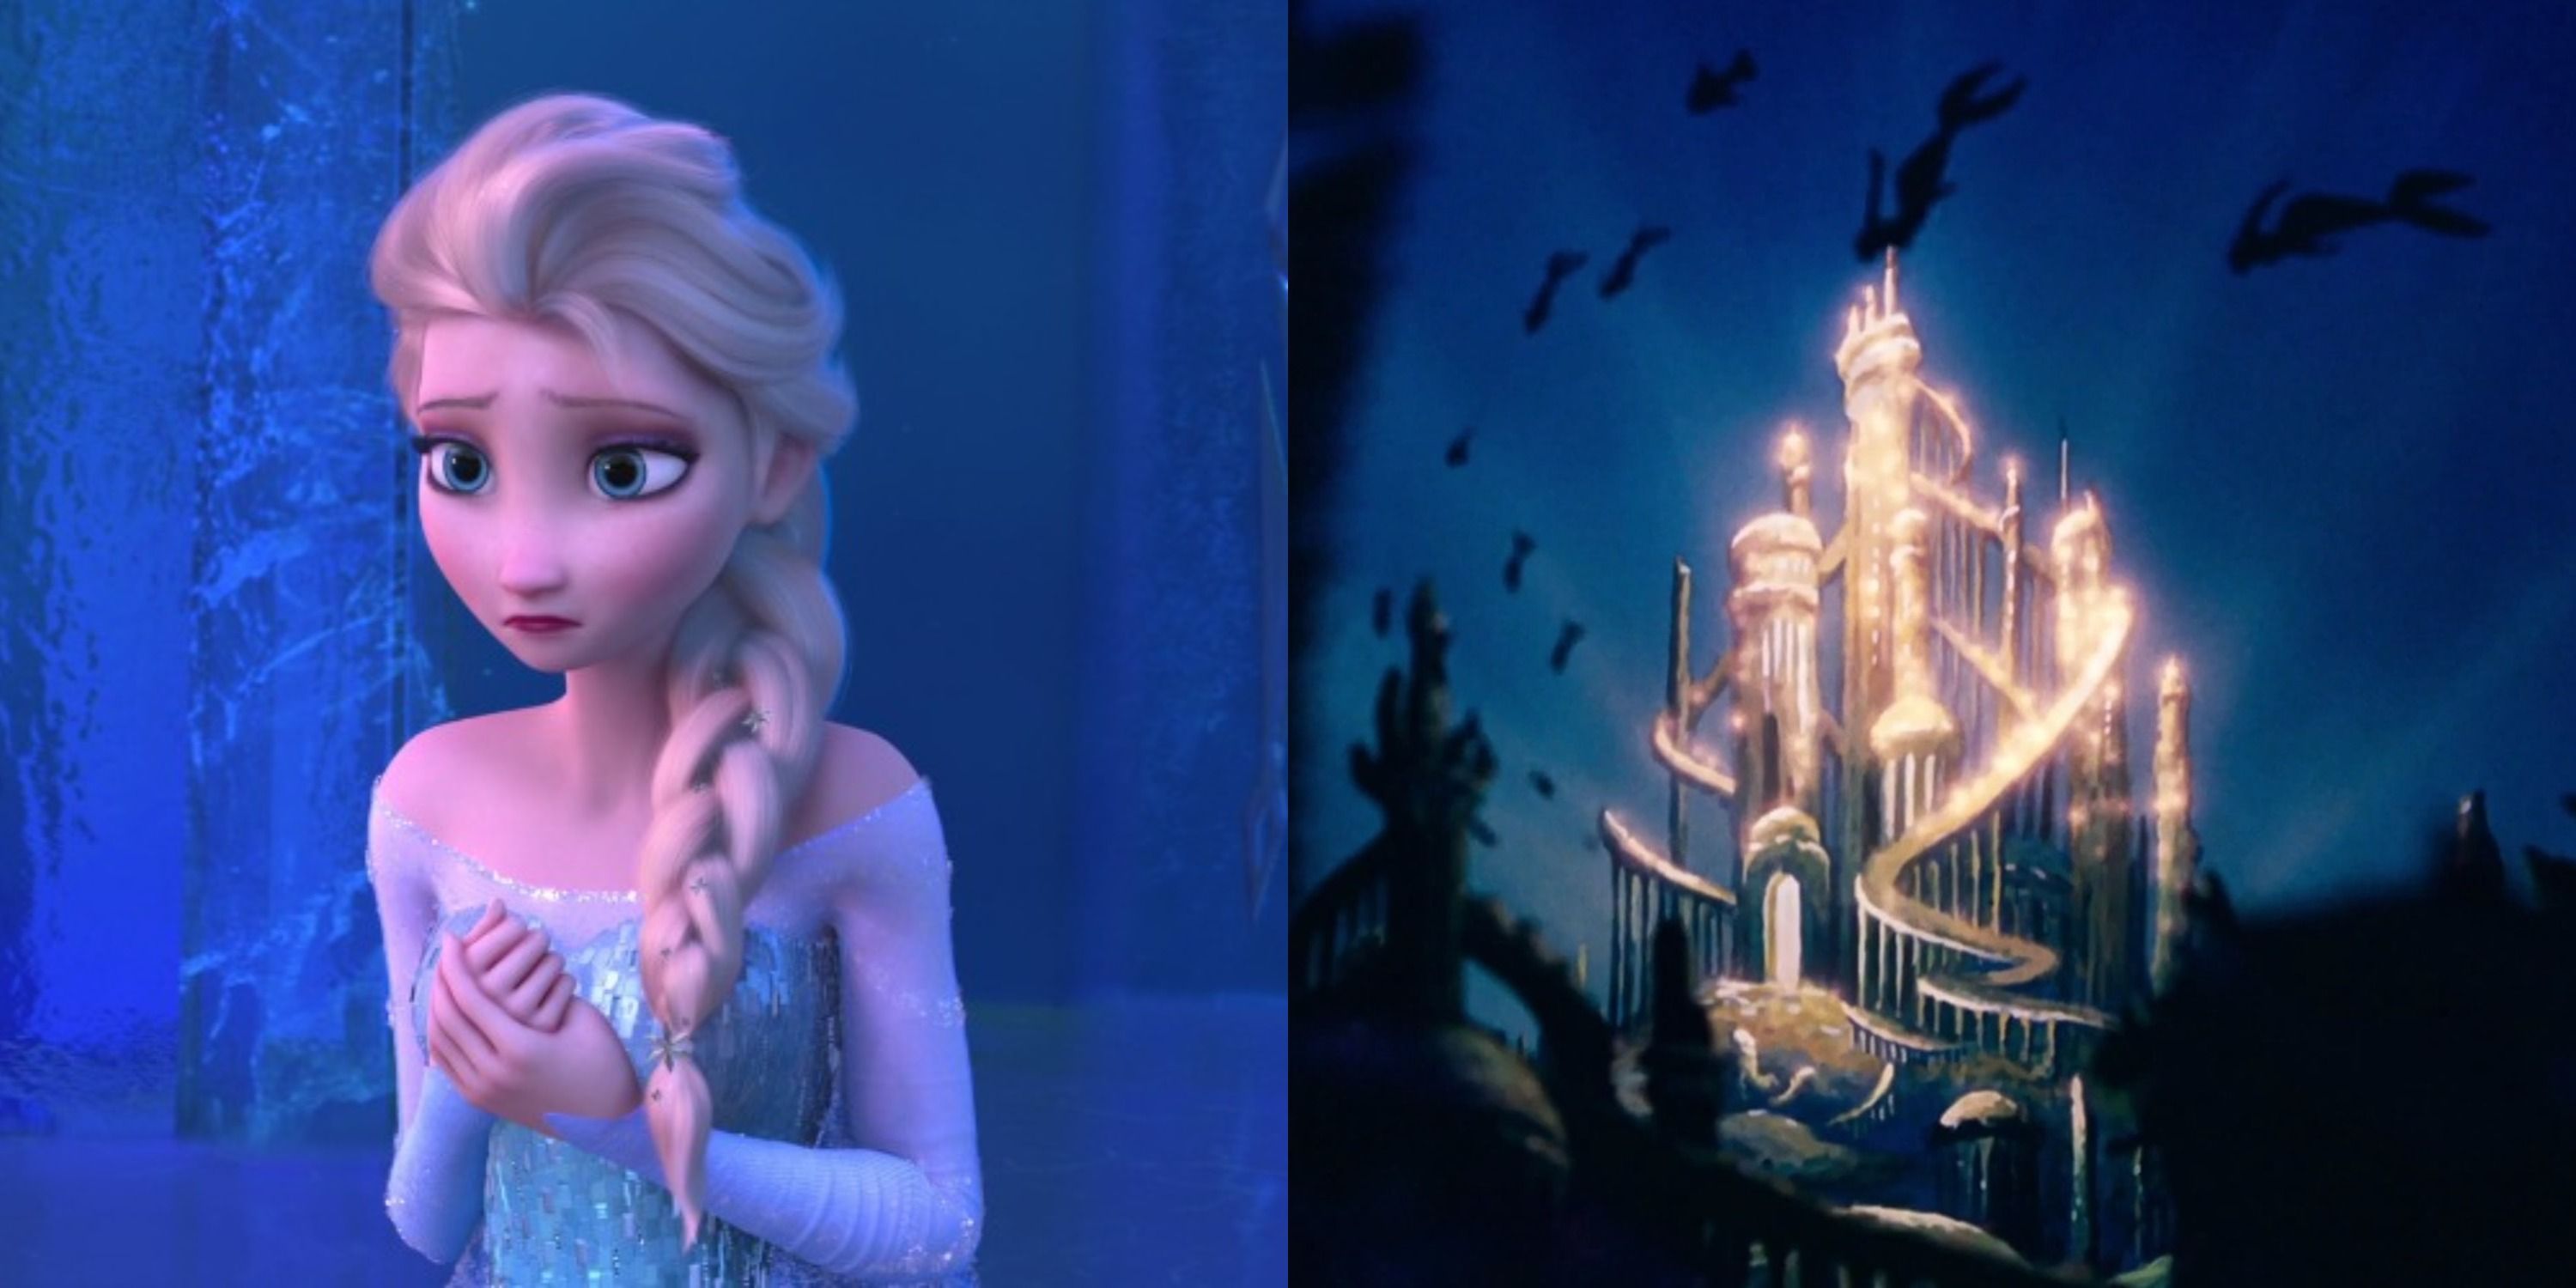 Featured image Elsa in her Ice Palace and King Triton Palace in The Little Mermaid